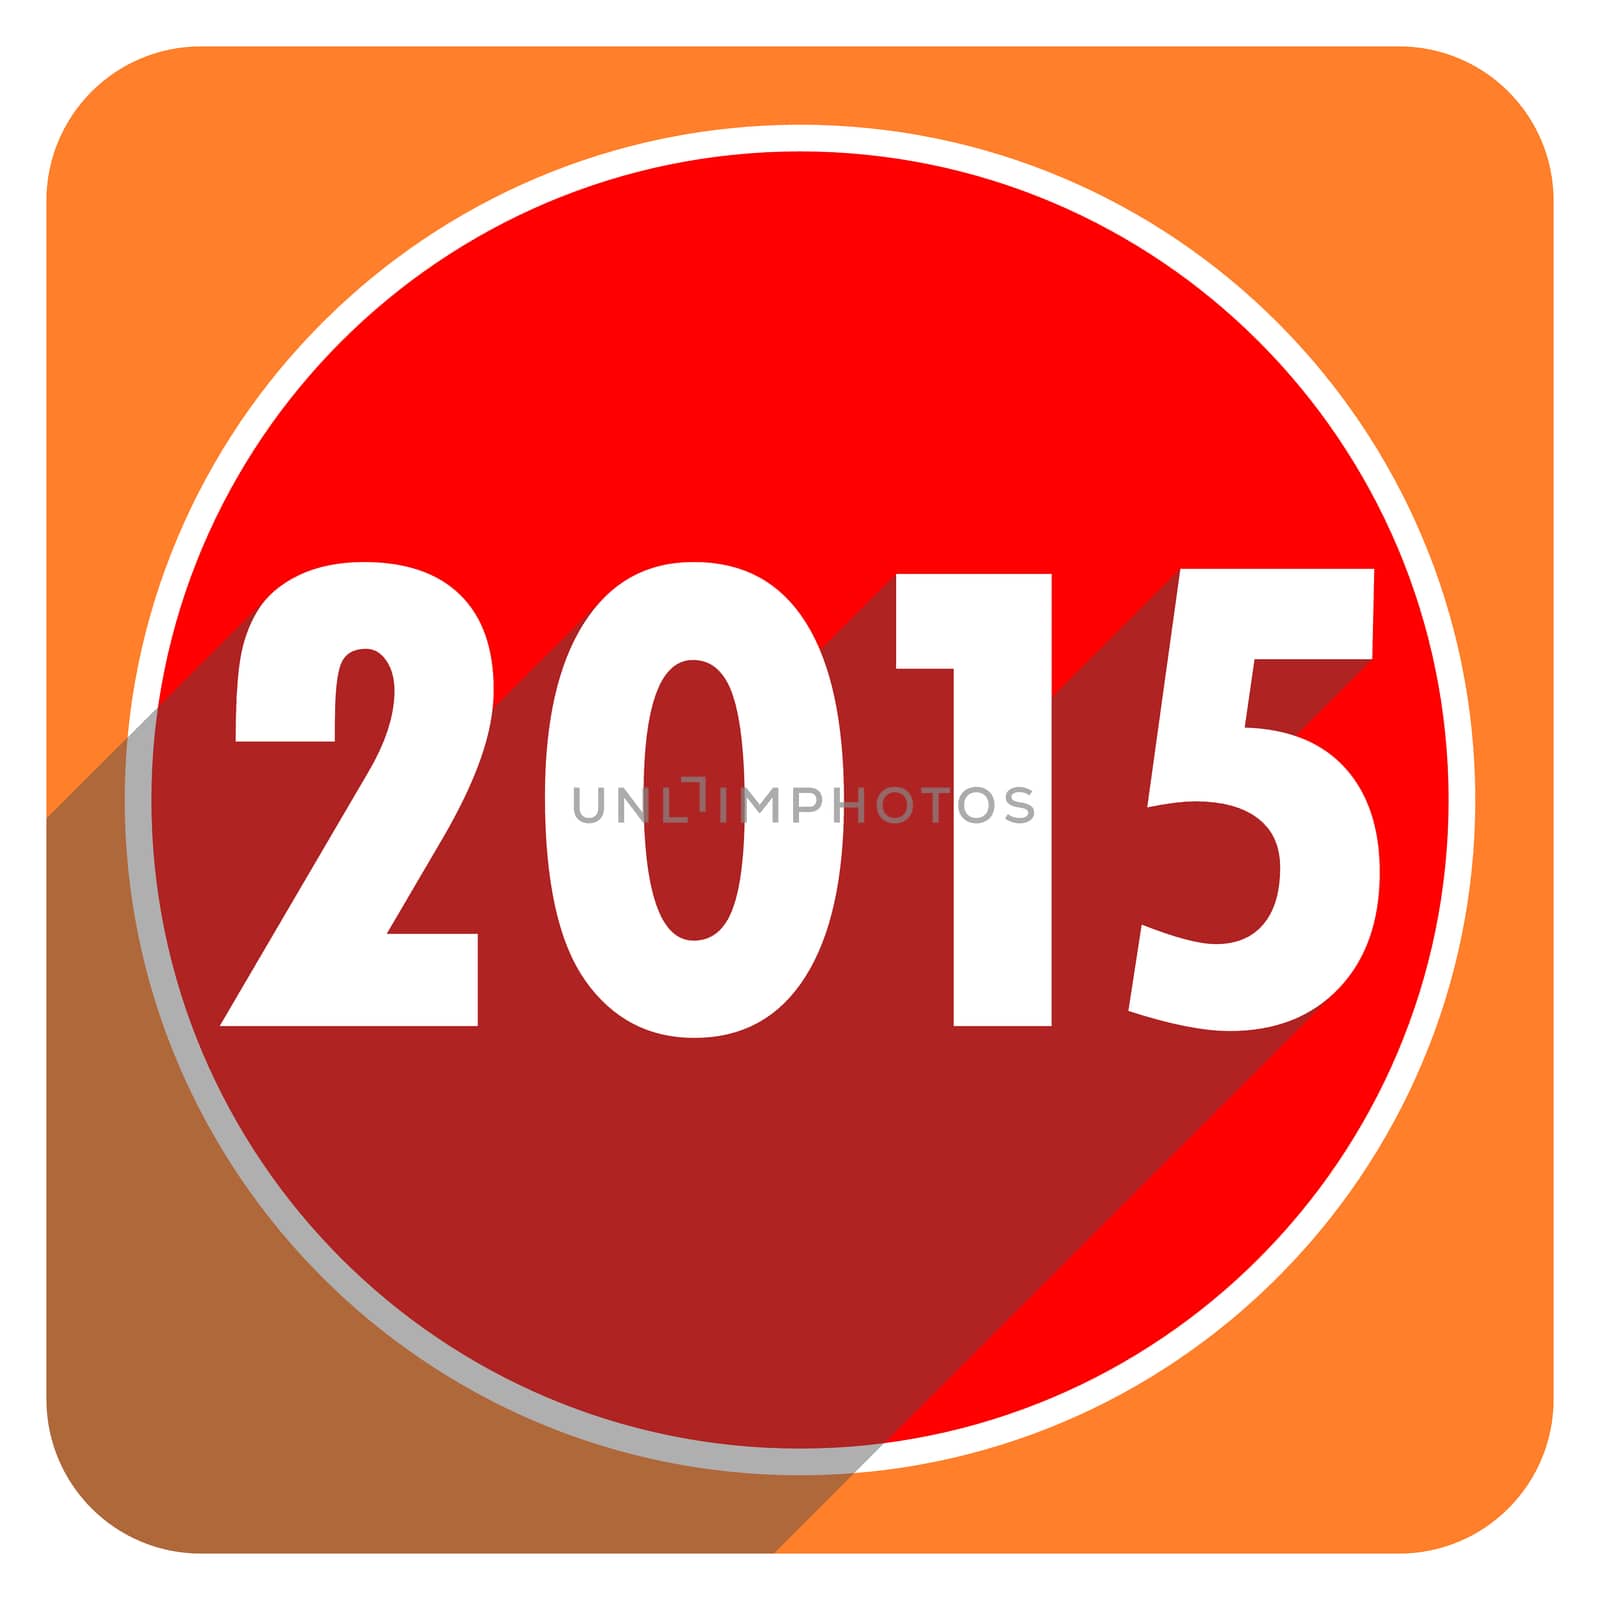 new year 2015 red flat icon isolated by alexwhite